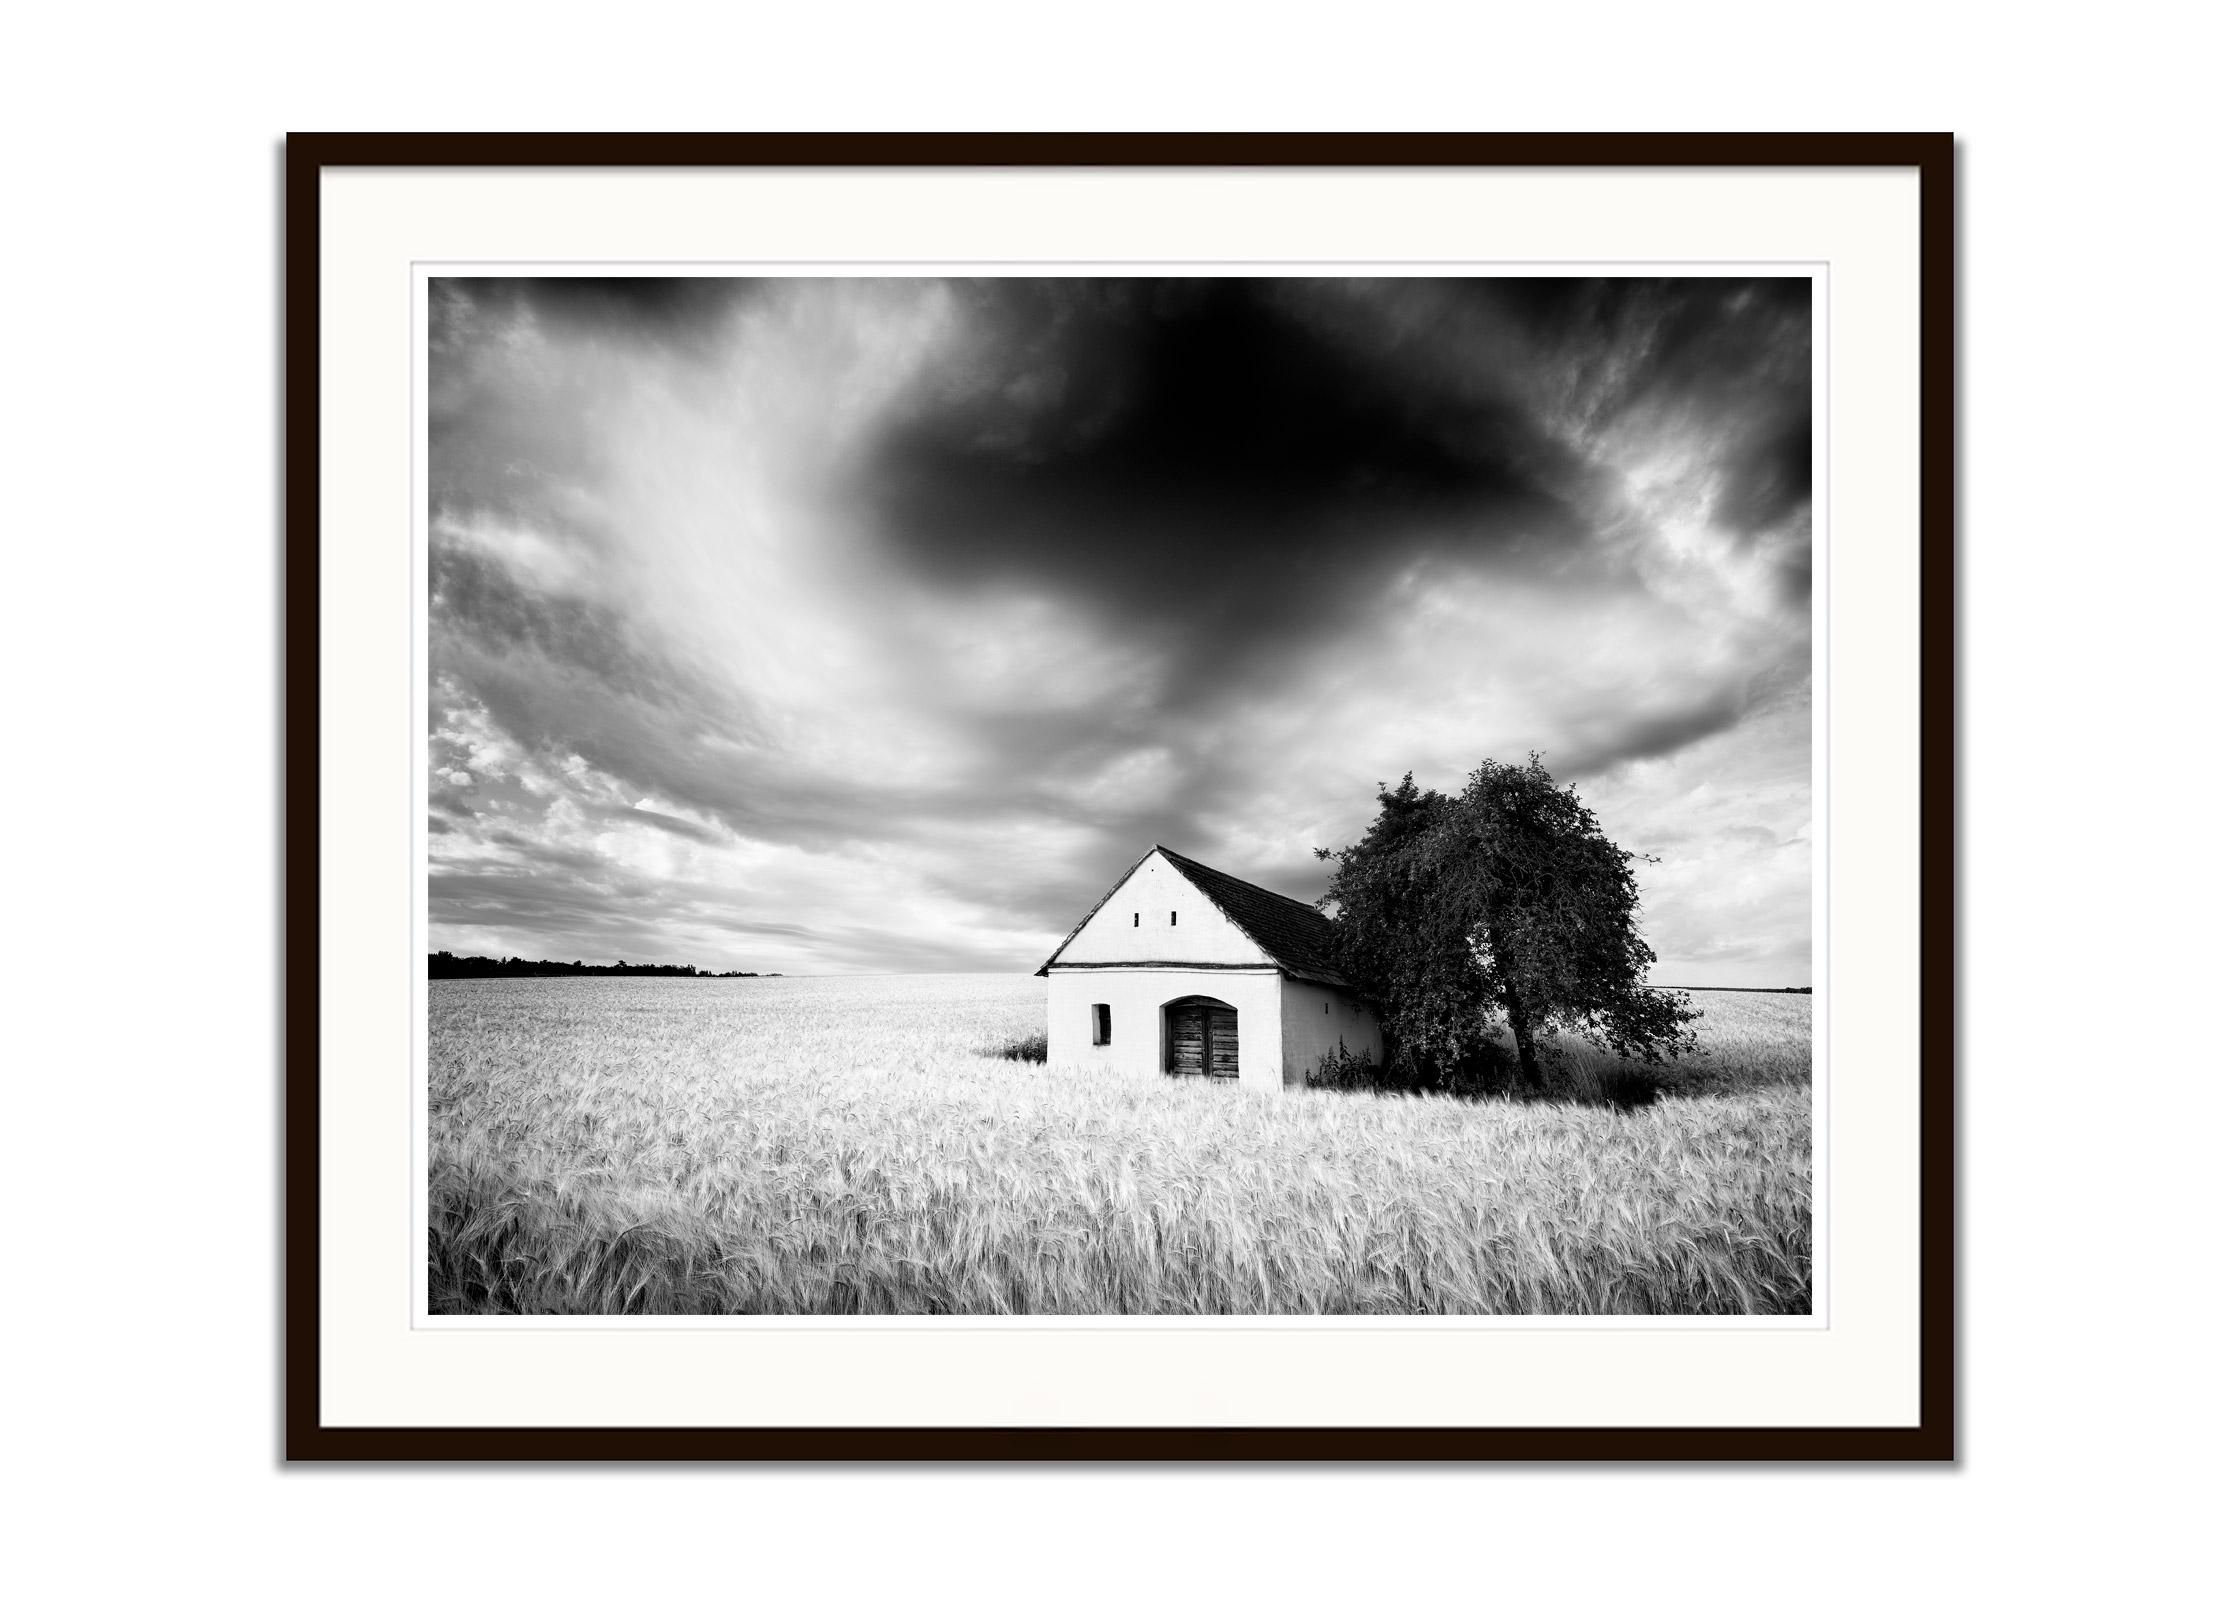 Wine Press House, cornfield, Giant Cloud, black and white photography, landscape - Contemporary Photograph by Gerald Berghammer